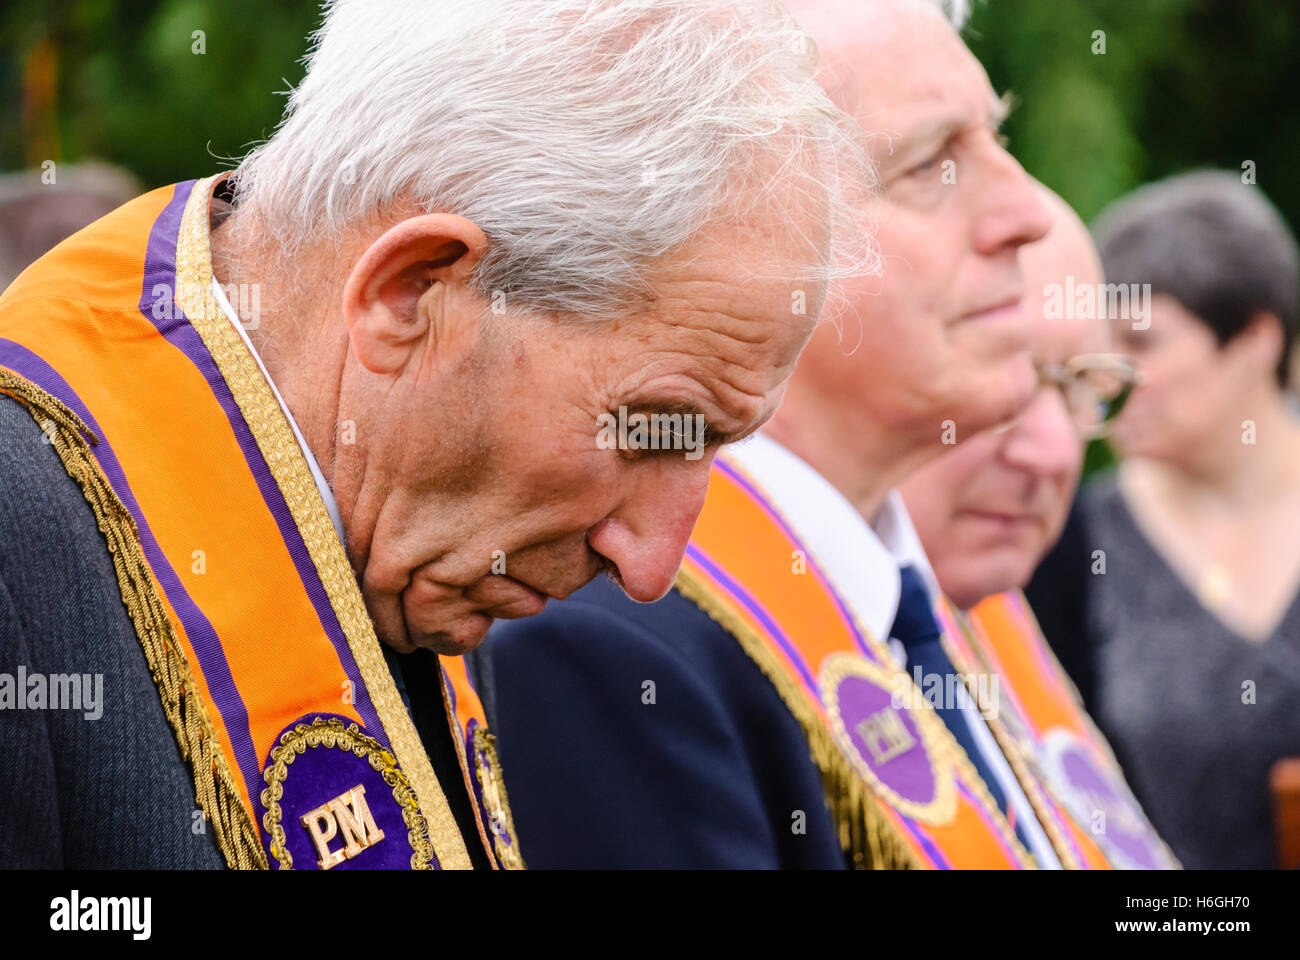 Orangeman wearing an orange sash collarette prays during an outdoor service in 'The Field' on the 12th July. Stock Photo